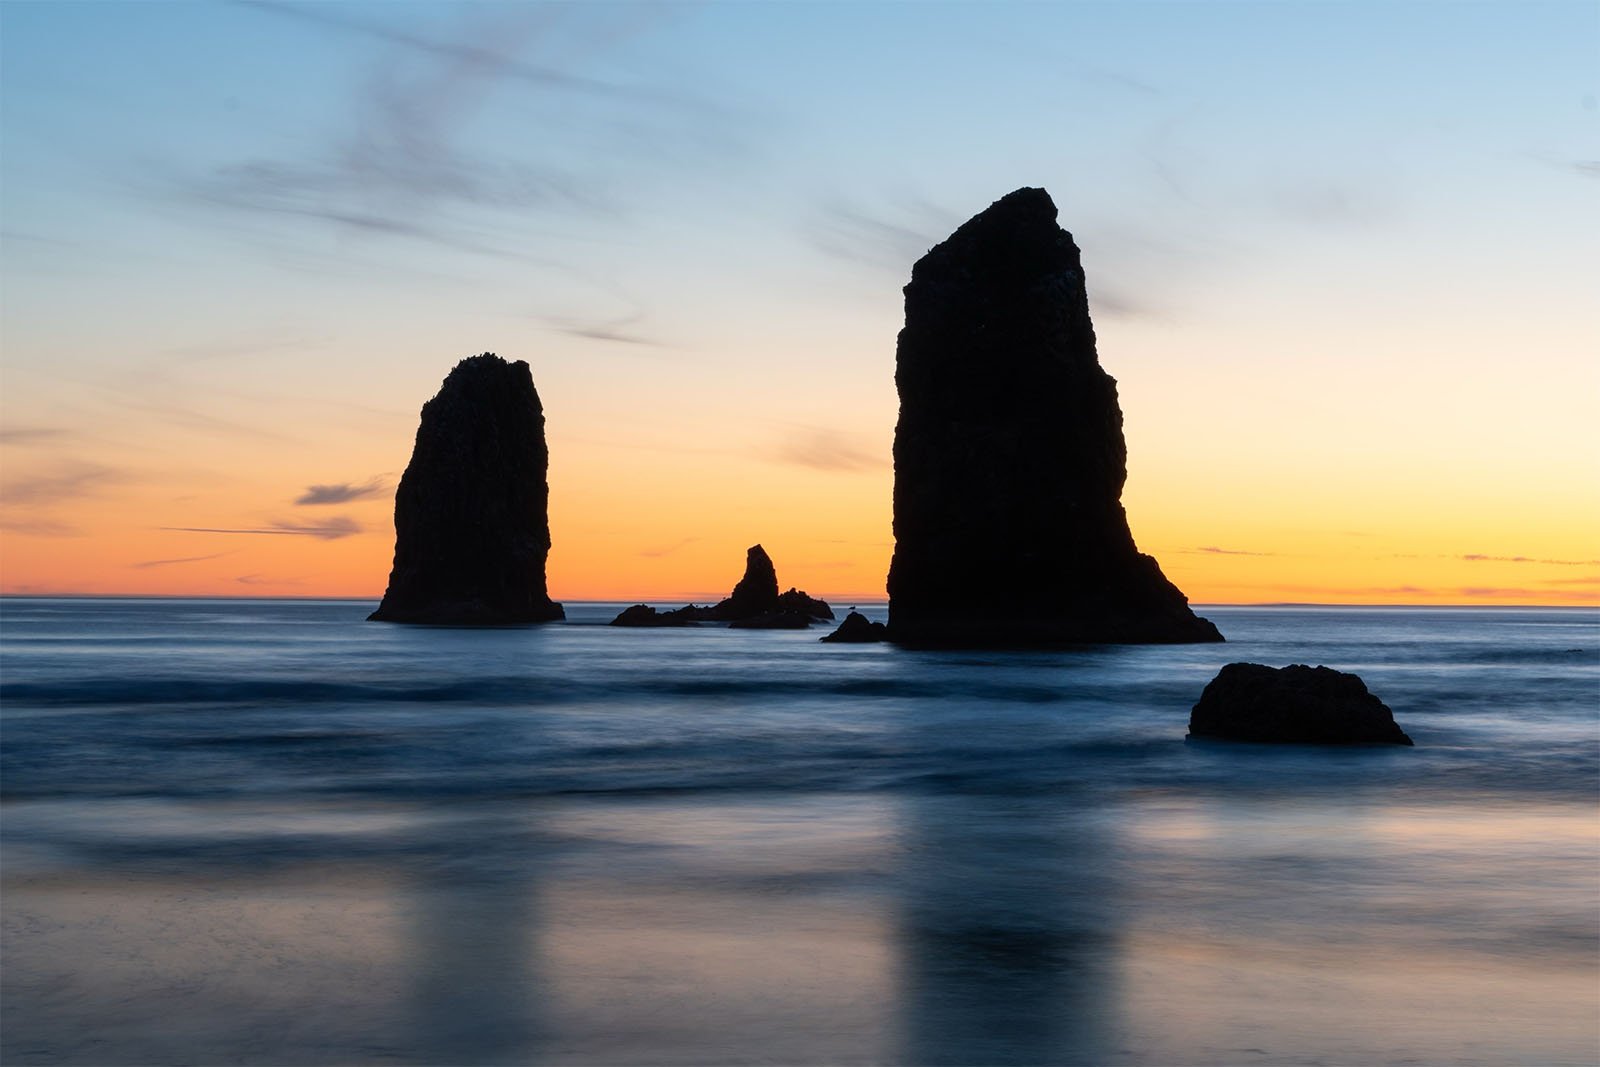 A serene sunset at the beach showing three large rock formations rising from the sea against a vivid orange and blue sky, with the ocean in the foreground appearing smooth and misty.